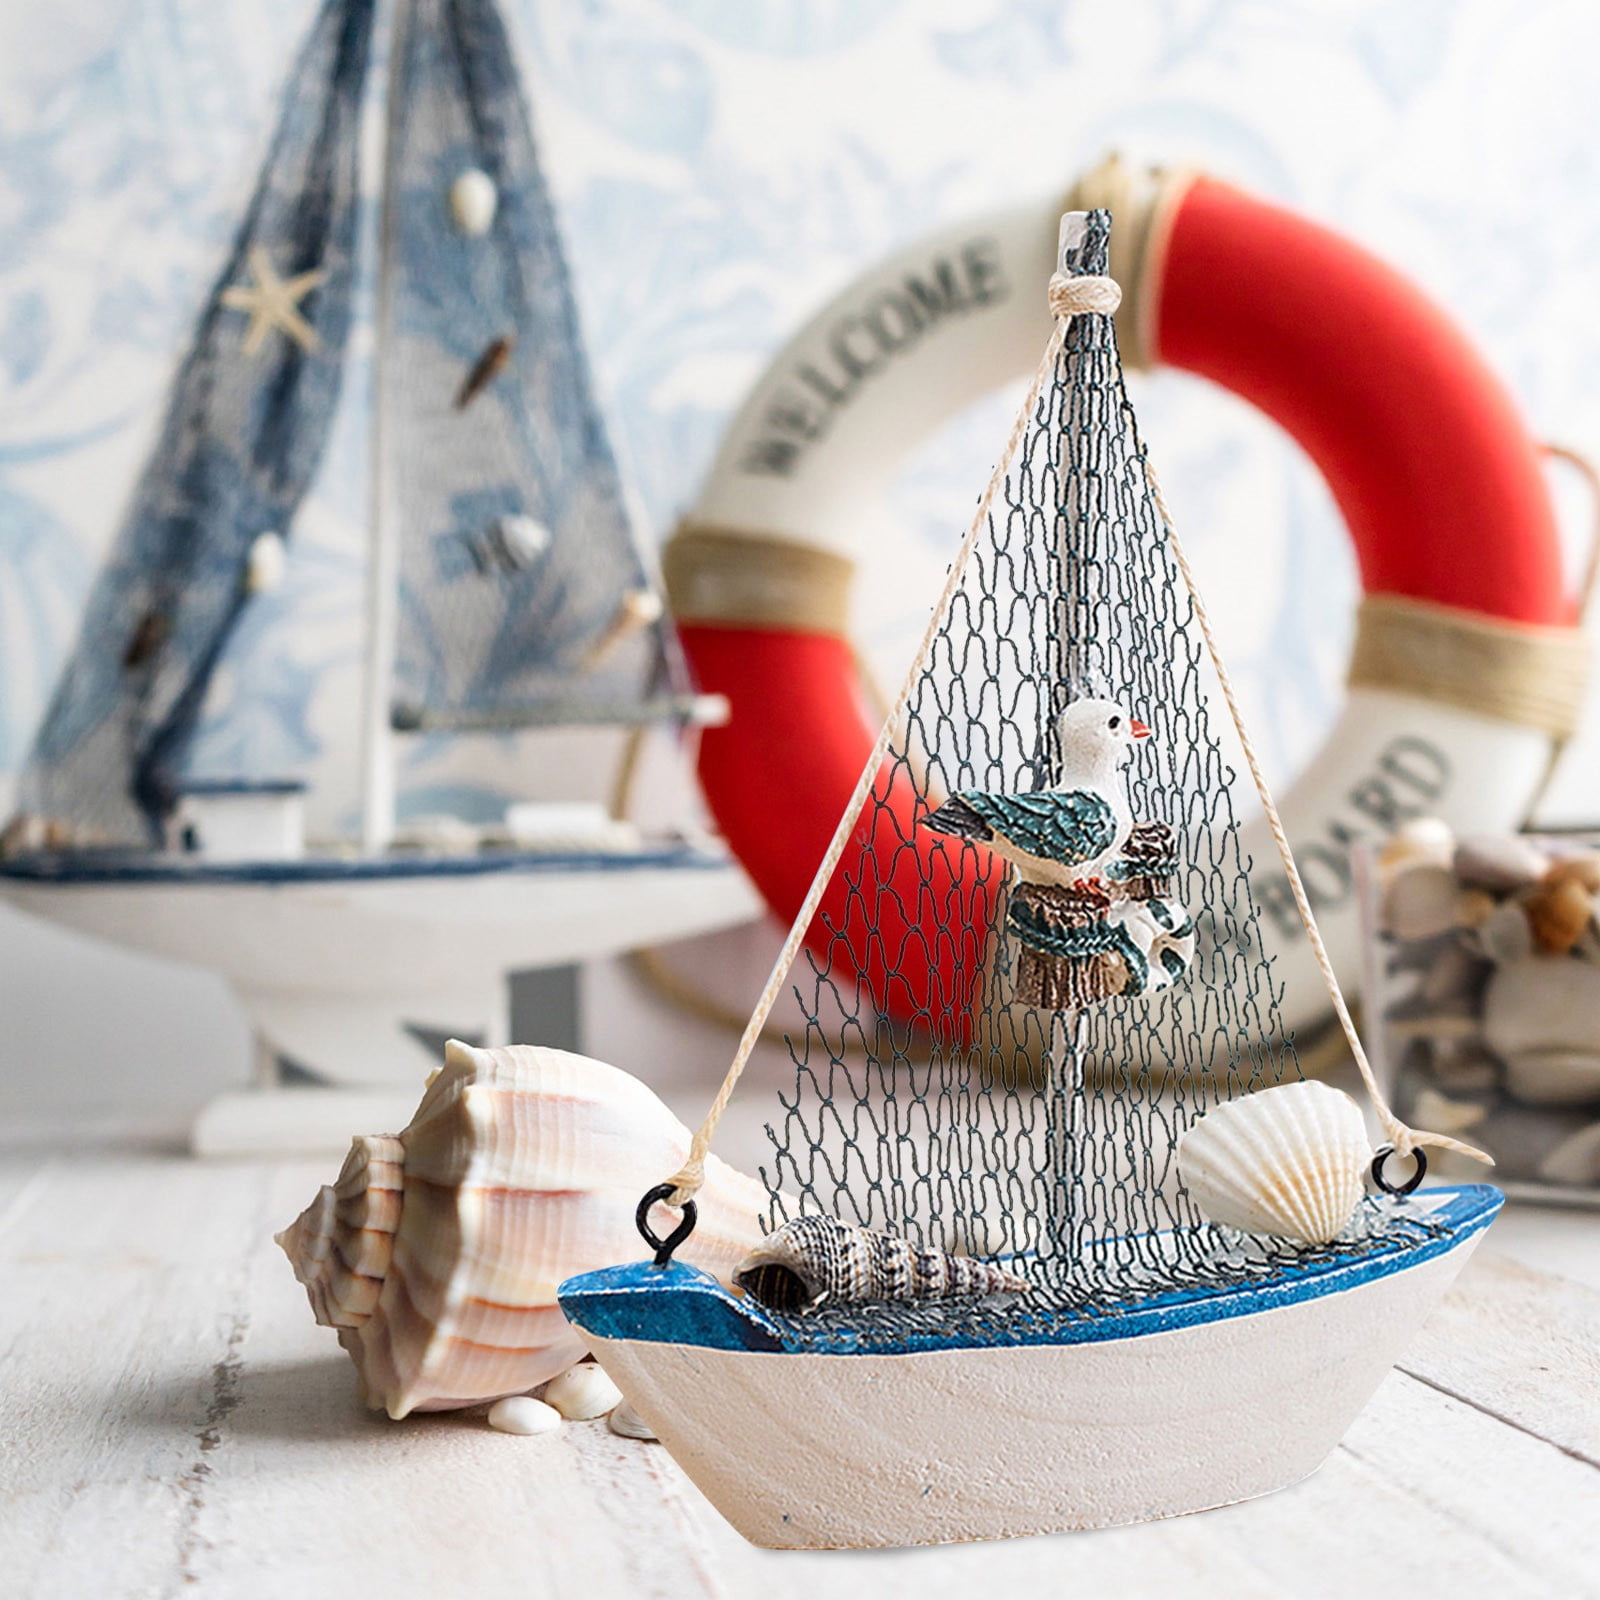 Rustic Vintage Ornament Table Decor Room Wedding Decoration Decorations For  Party Kitchen Home Nautical Wooden Sailboat Beach Retro Bathroom Office  Center 